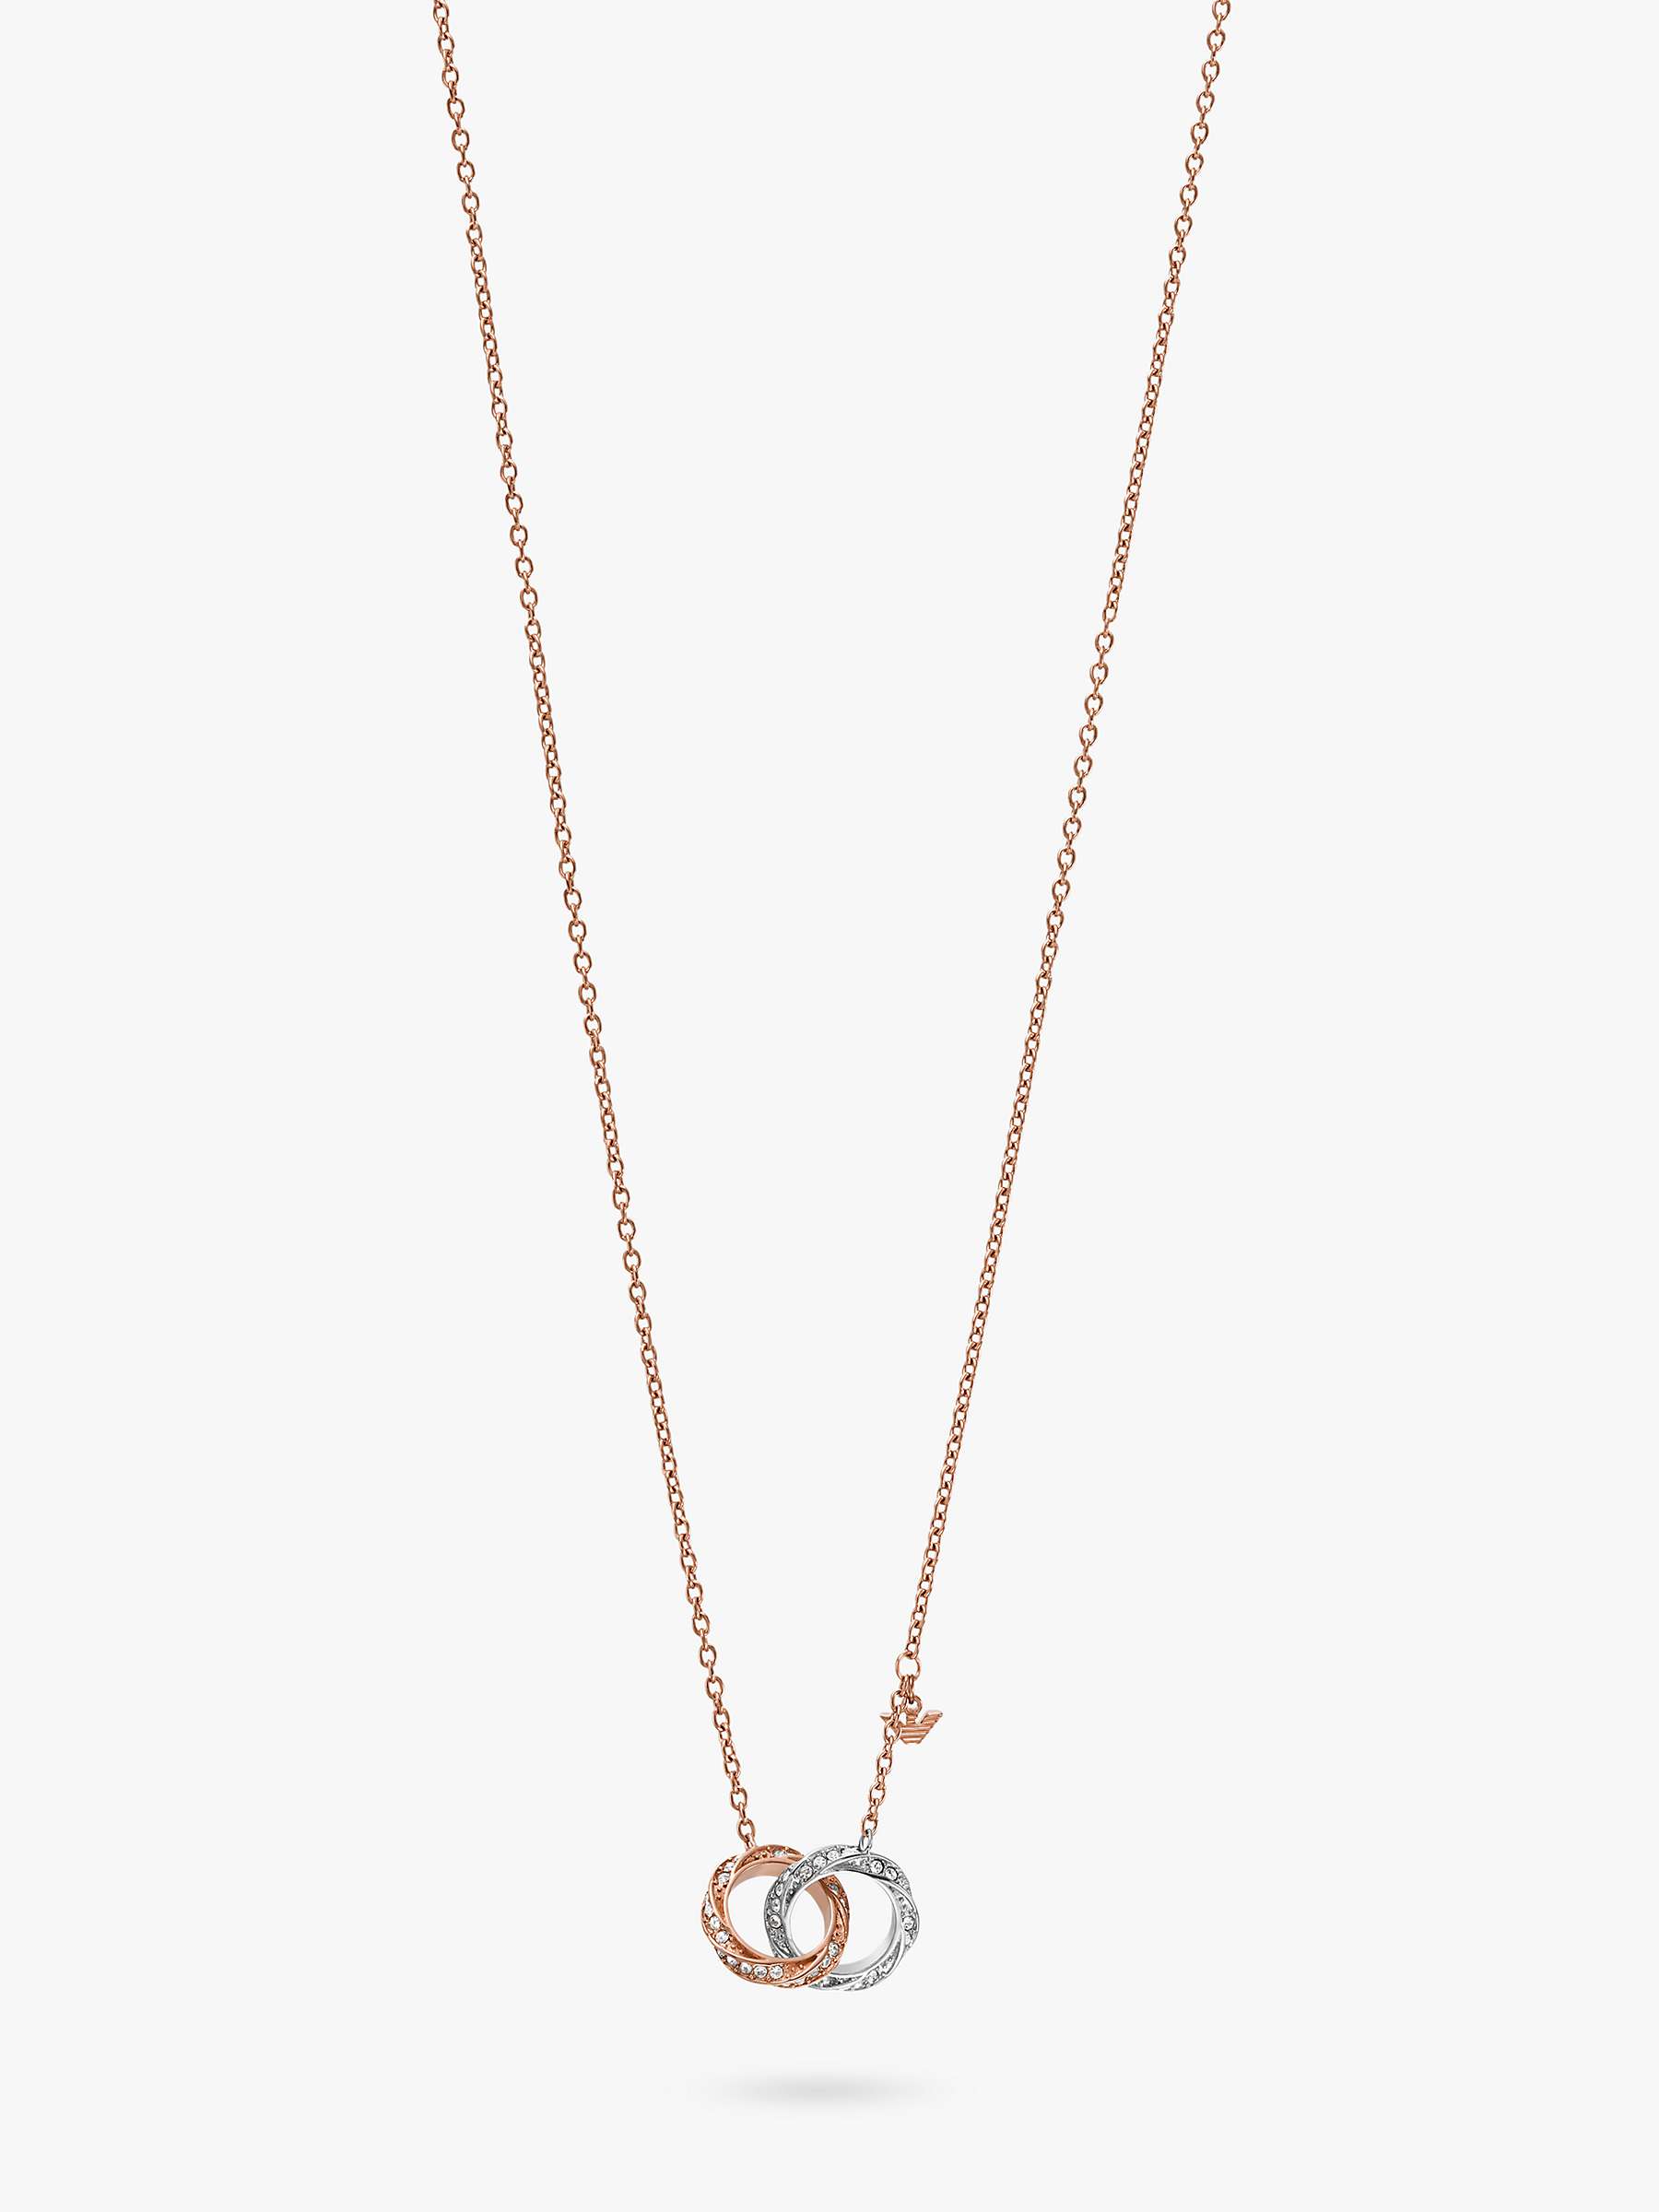 Buy Emporio Armani Crystal Circle Link Pendant Necklace, Rose Gold/Silver Online at johnlewis.com